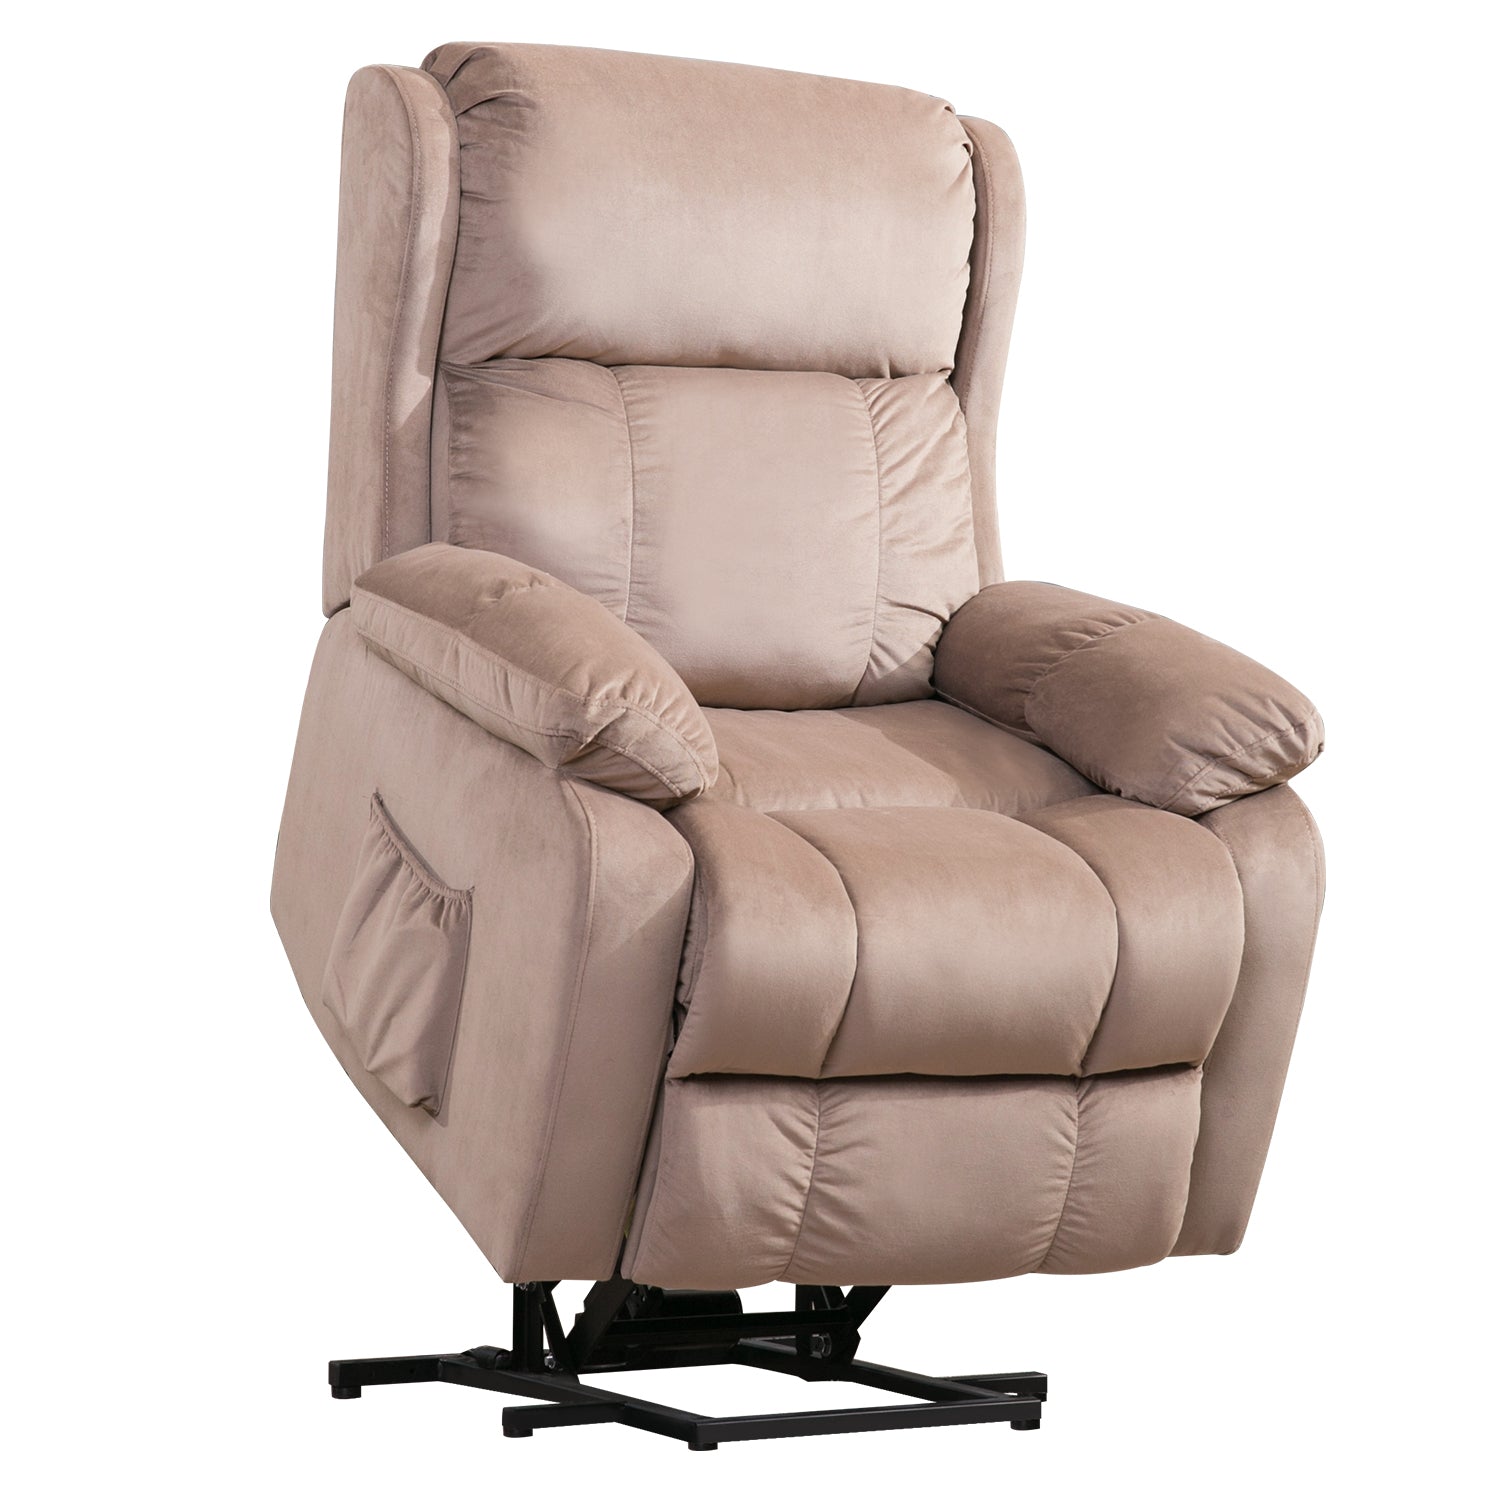 Power Lift Chair Soft Fabric Upholstery Recliner with Remote Control-Boyel Living